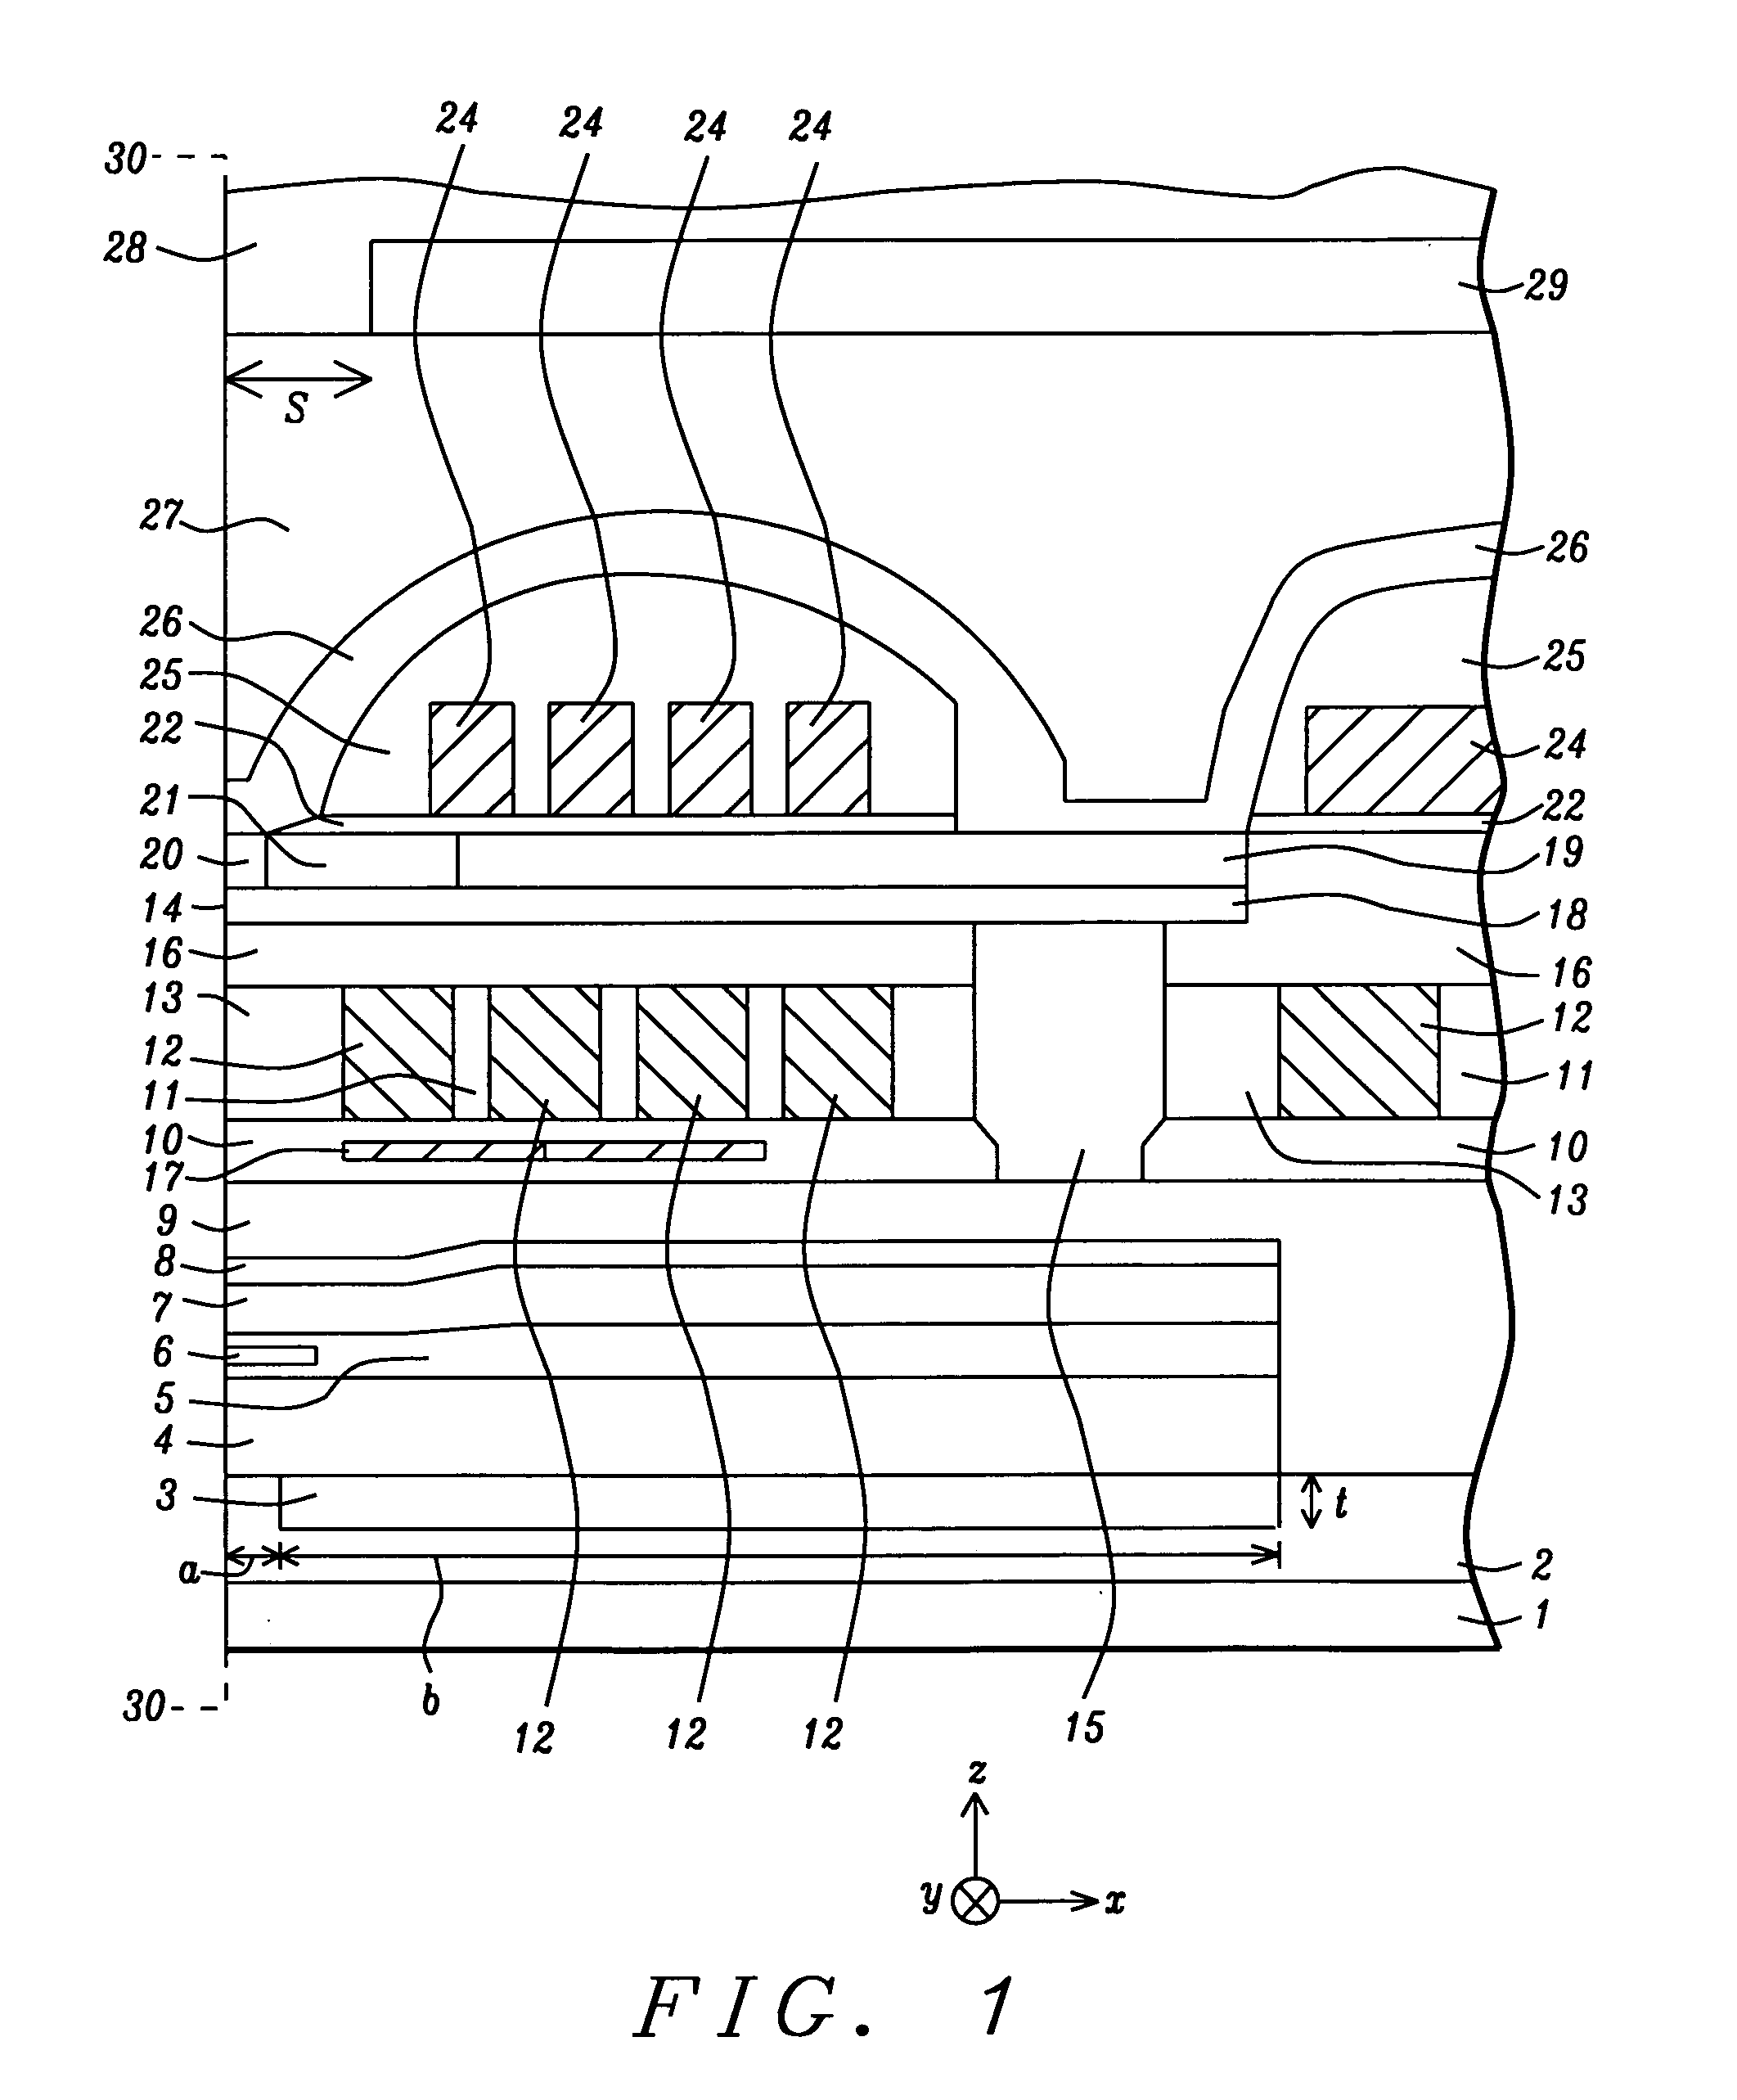 Insertion under read shield for improved read gap actuation in dynamic flying height